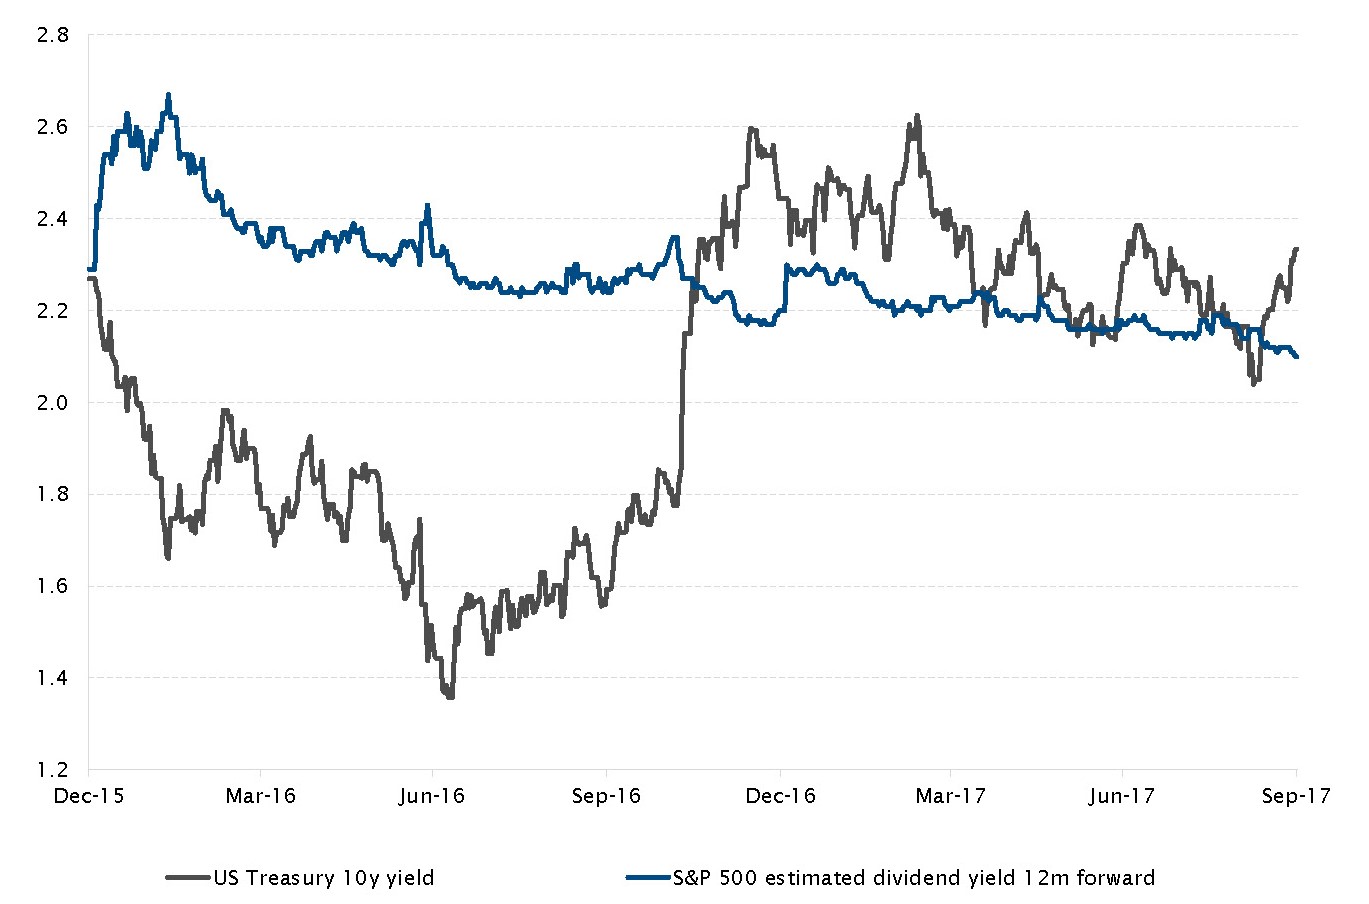 US Treasury 10y yield and S&P 500 estimated dividend yield (12 month forward)